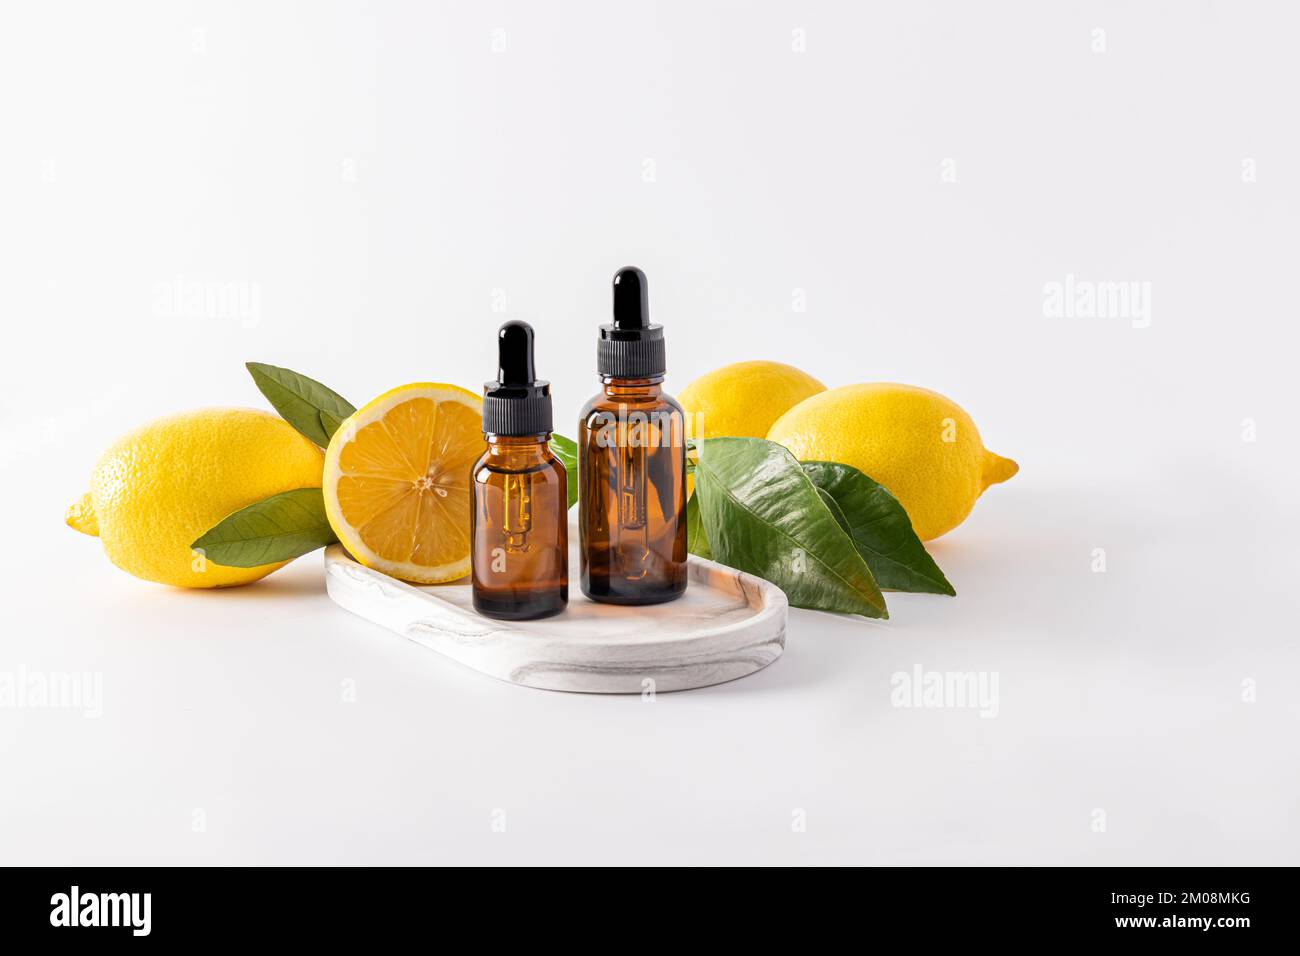 two bottles of dark glass with a dropper with cosmetic bleach stand on a plaster white tray among ripe lemons Stock Photo